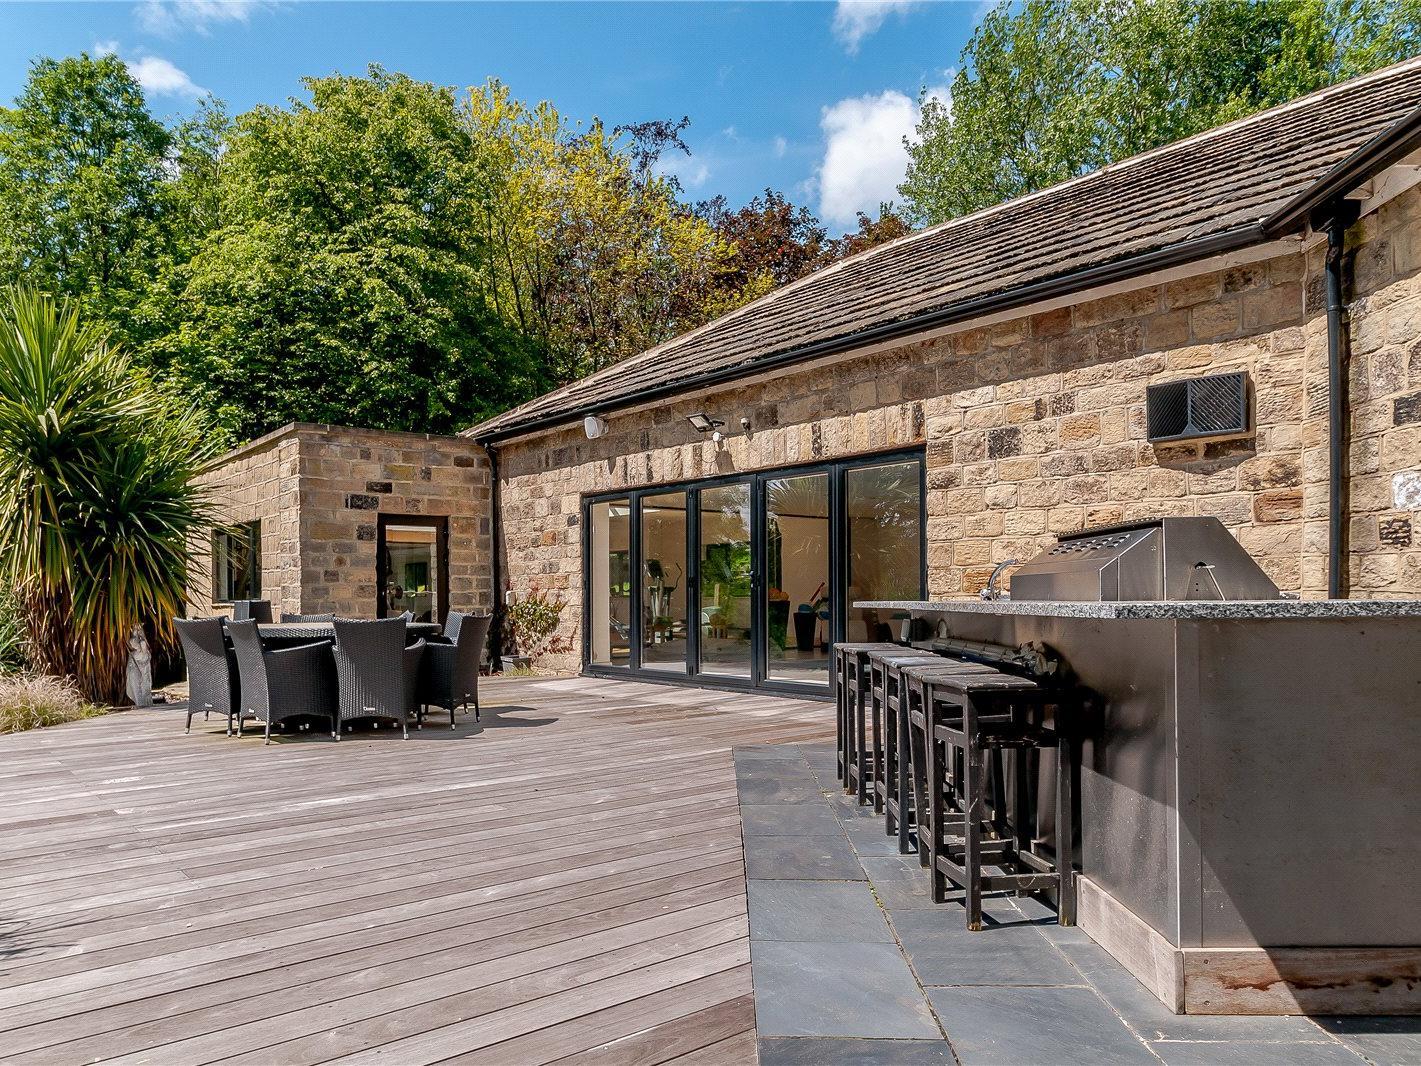 There are bi-folding doors leading out to a rear terrace, which is an ideal space for outdoor entertaining